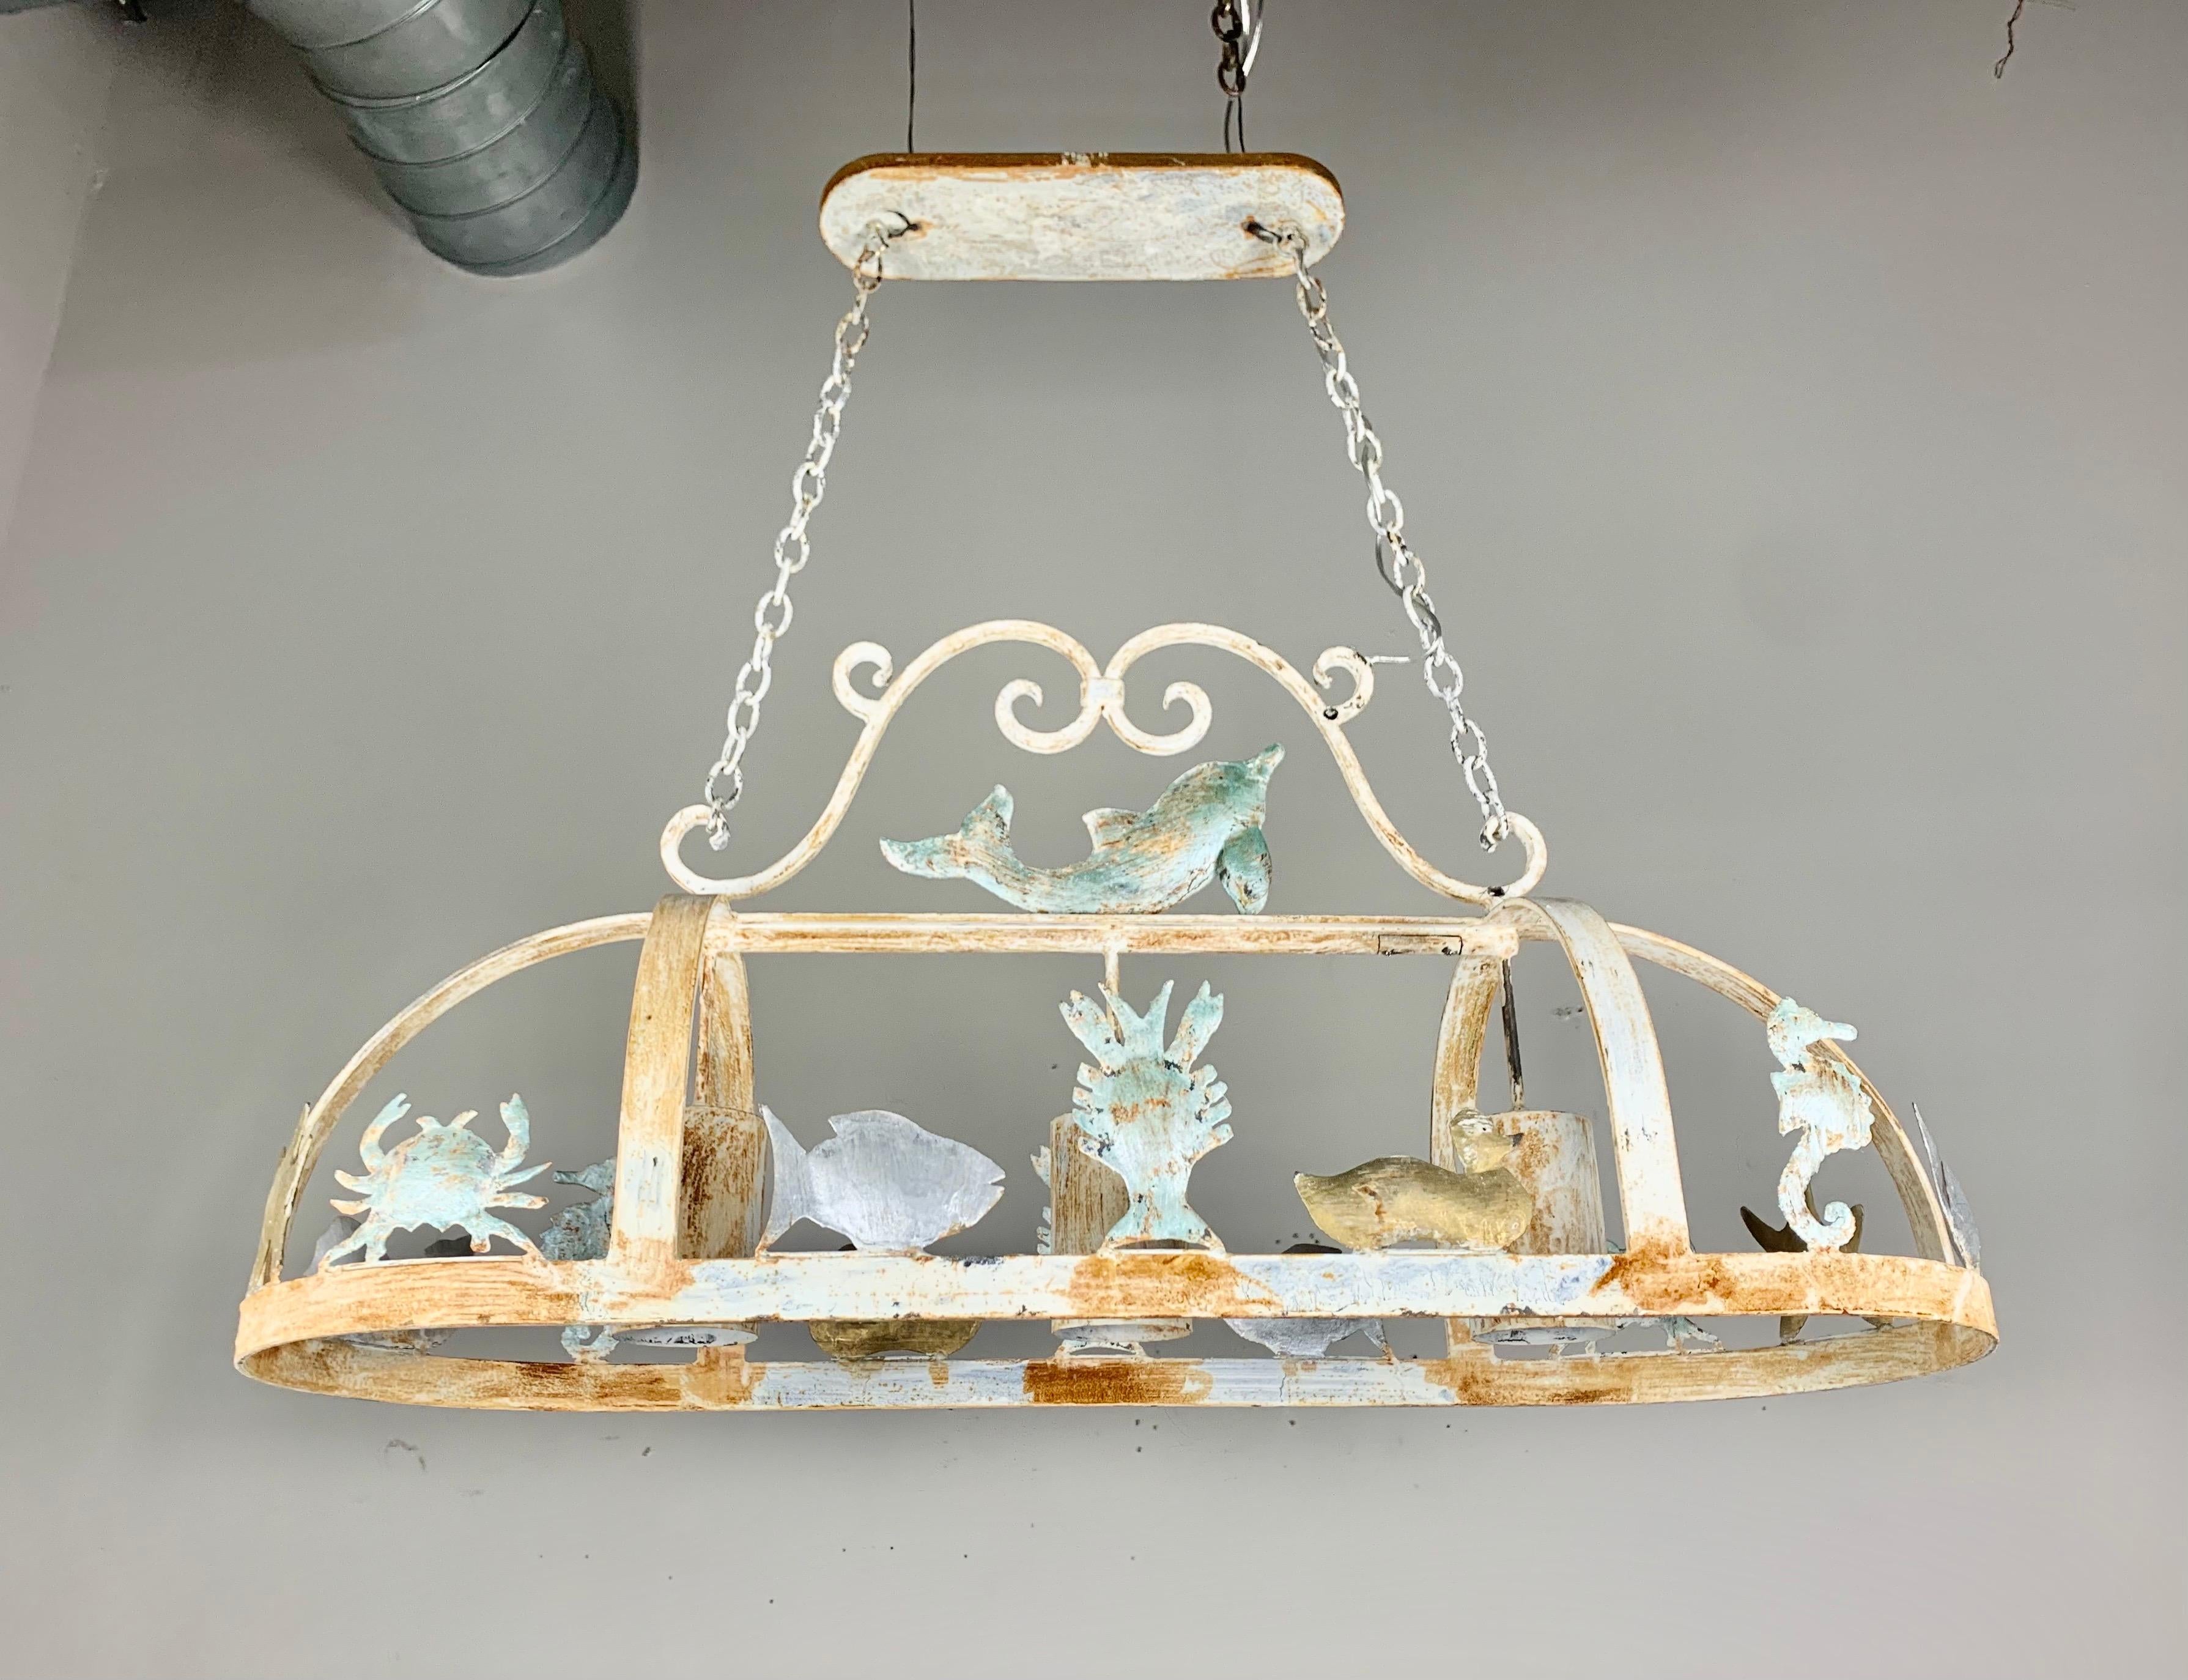 Other Painted Wrought Iron Ocean Inspired Pot Rack/Ceiling Light